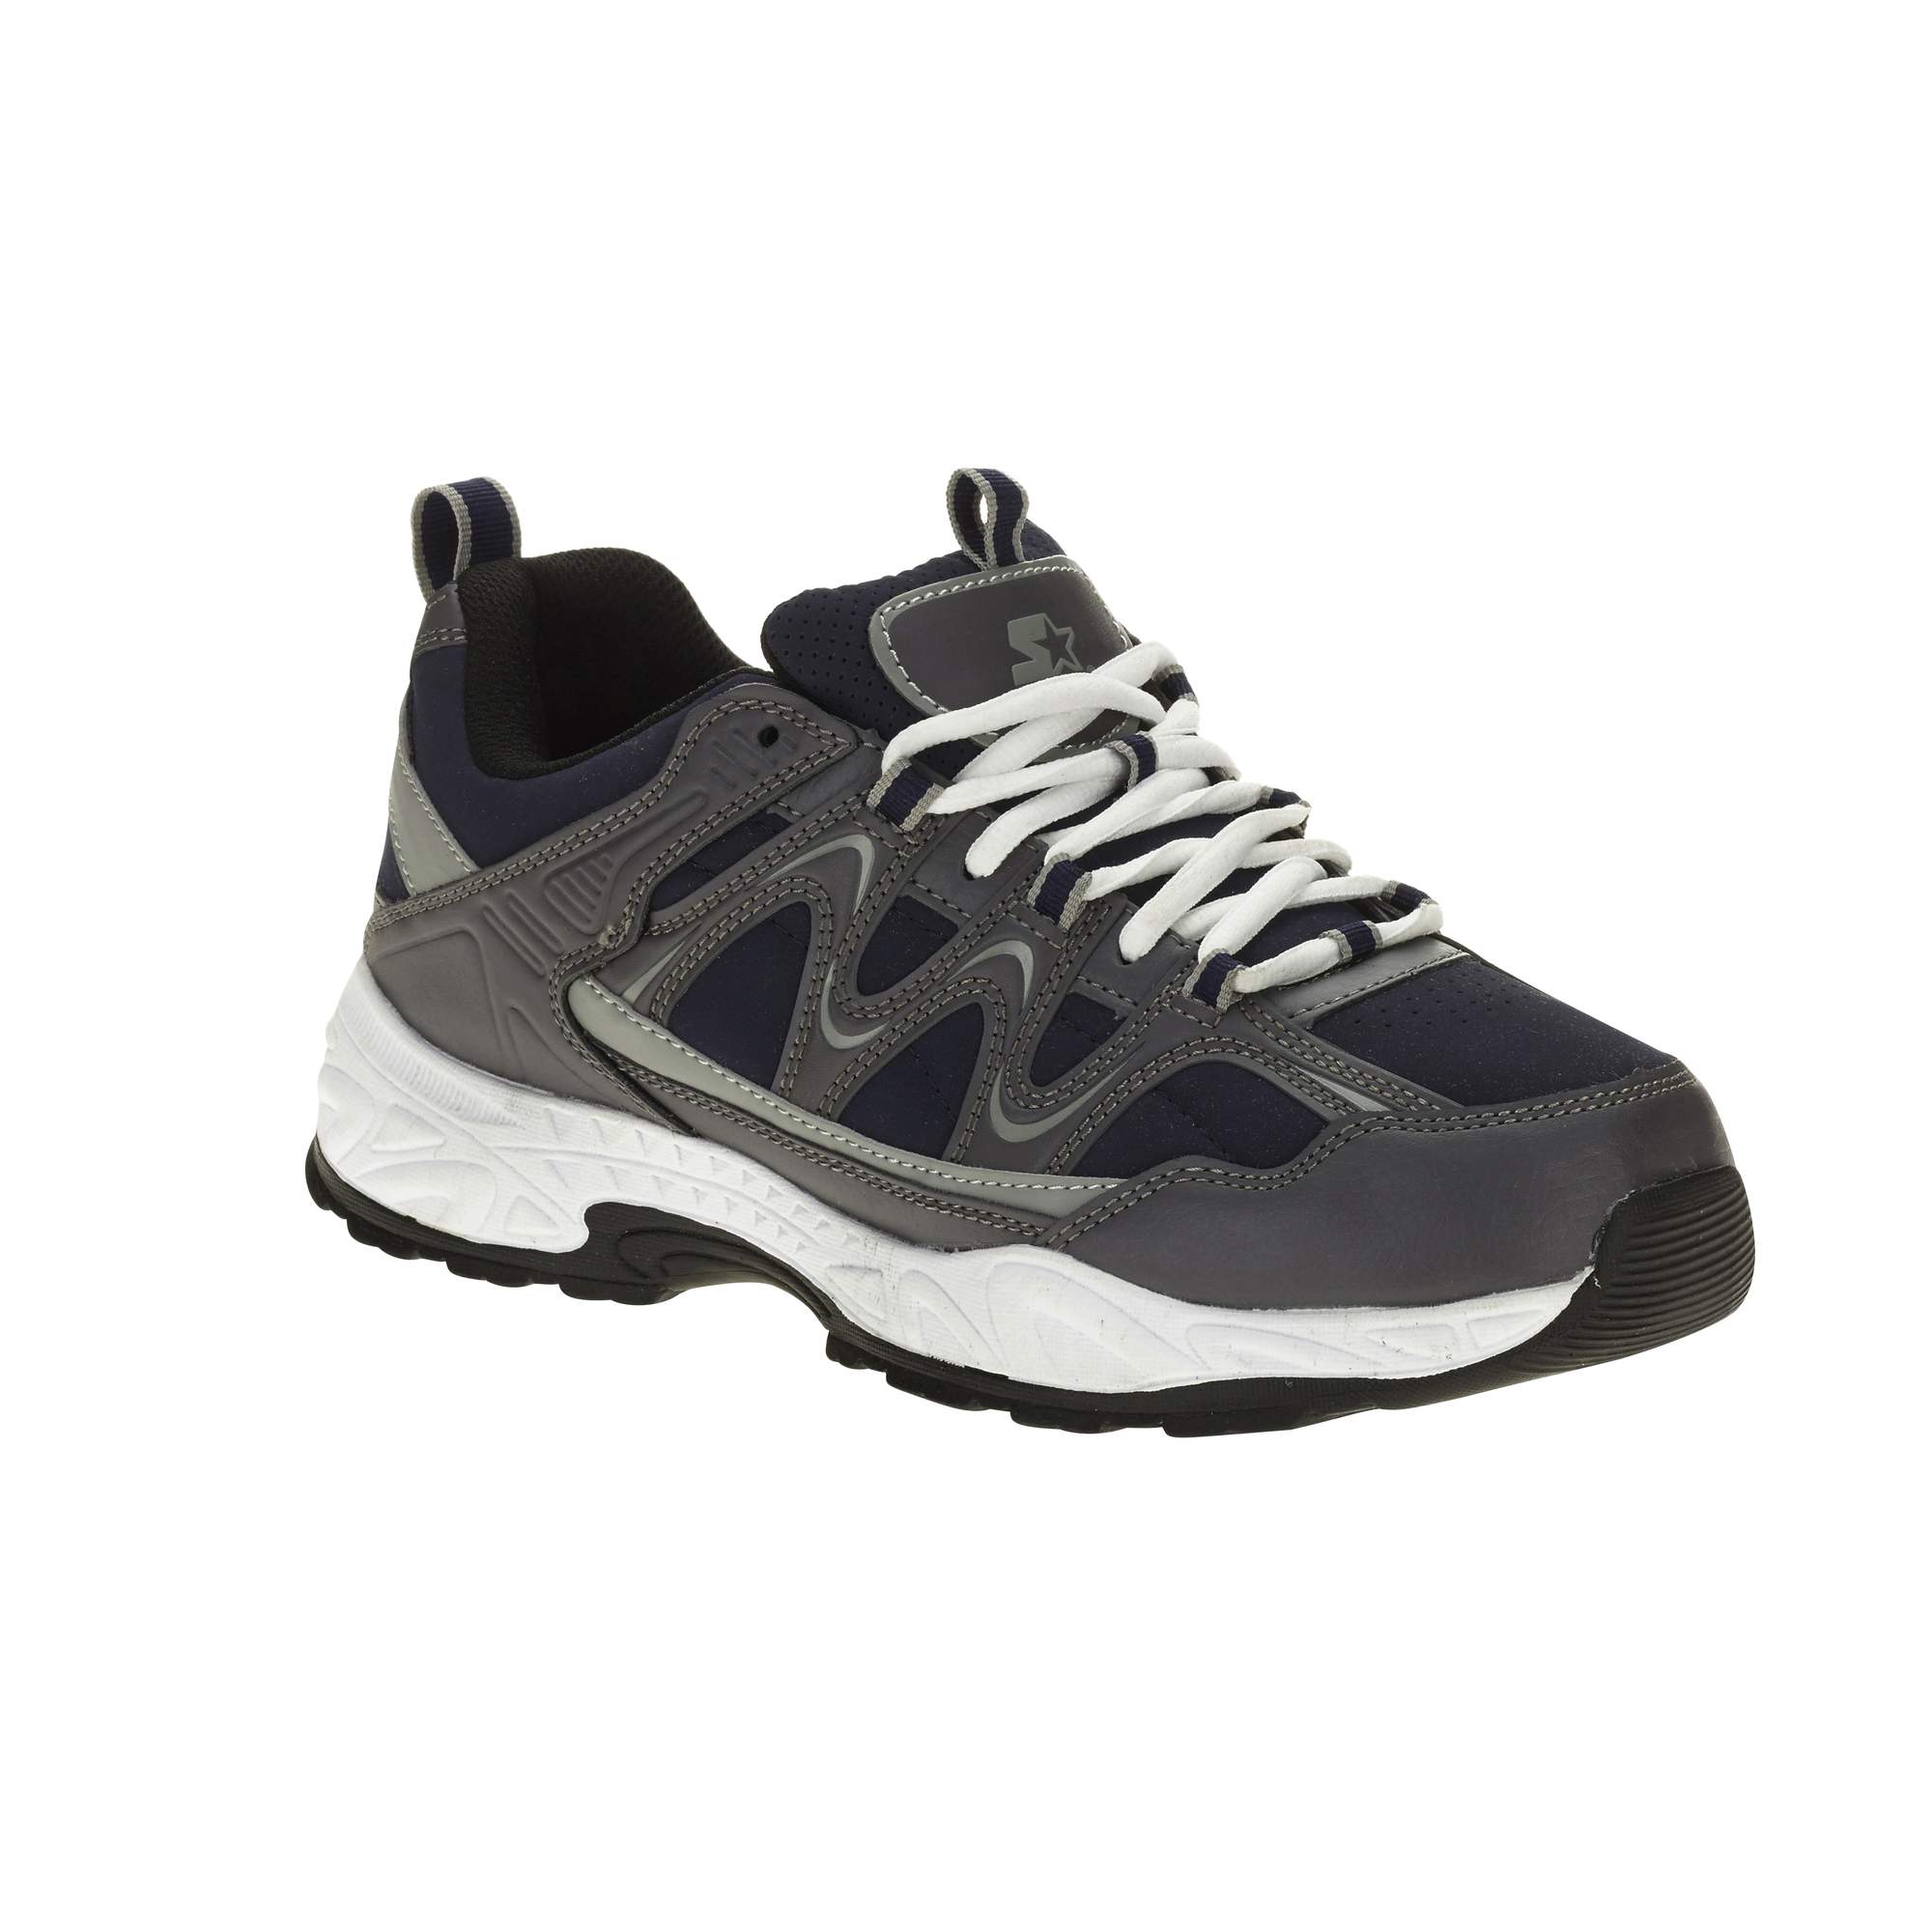 Starter Men's Chunky Wide Width Athletic Shoe - image 1 of 2